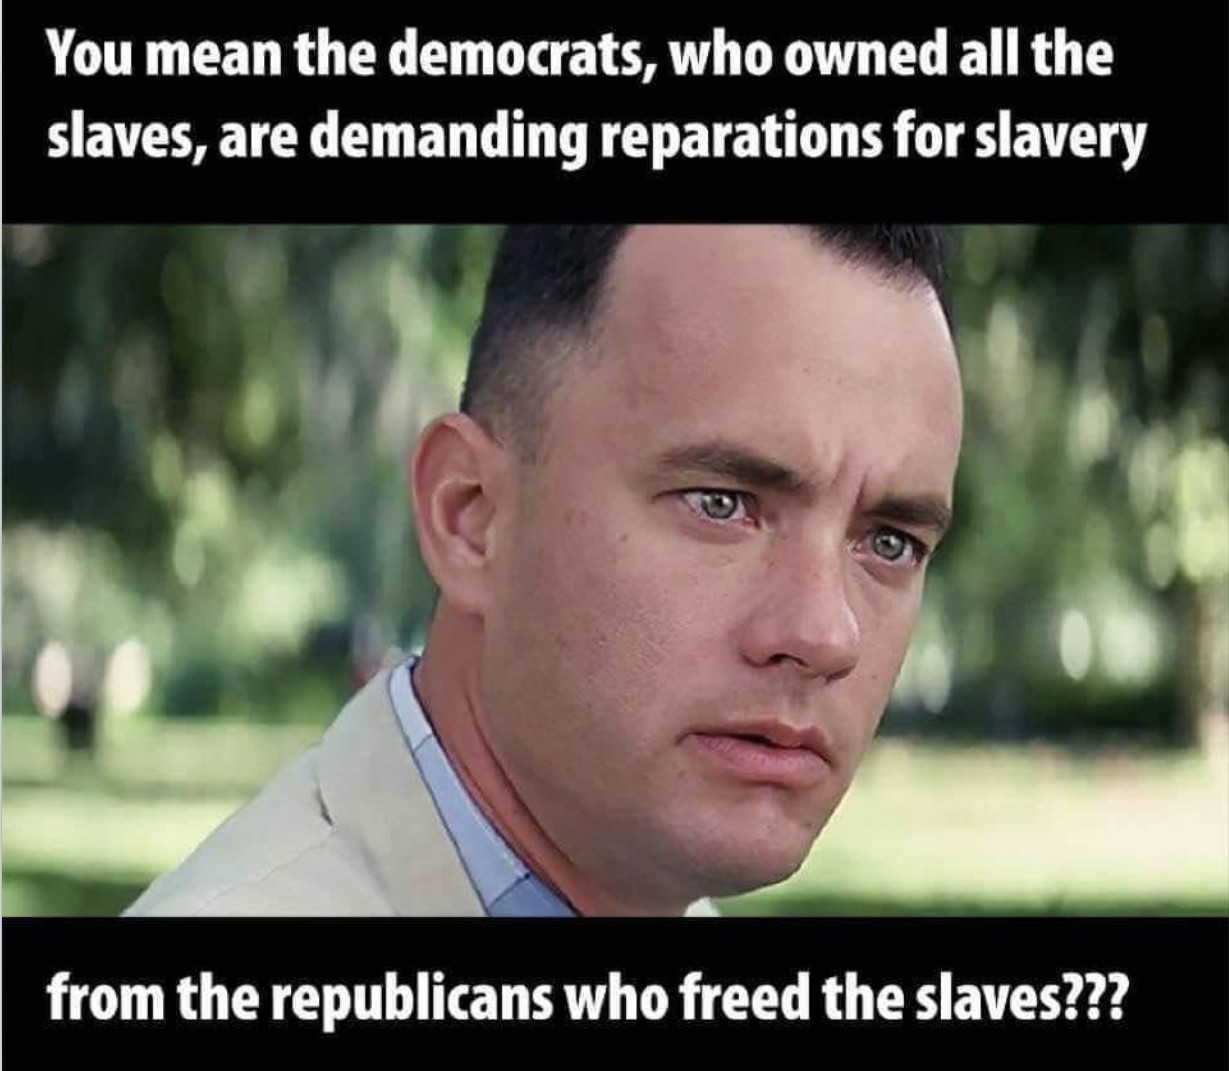 justin trudeau memes blackface - You mean the democrats, who owned all the slaves, are demanding reparations for slavery from the republicans who freed the slaves???